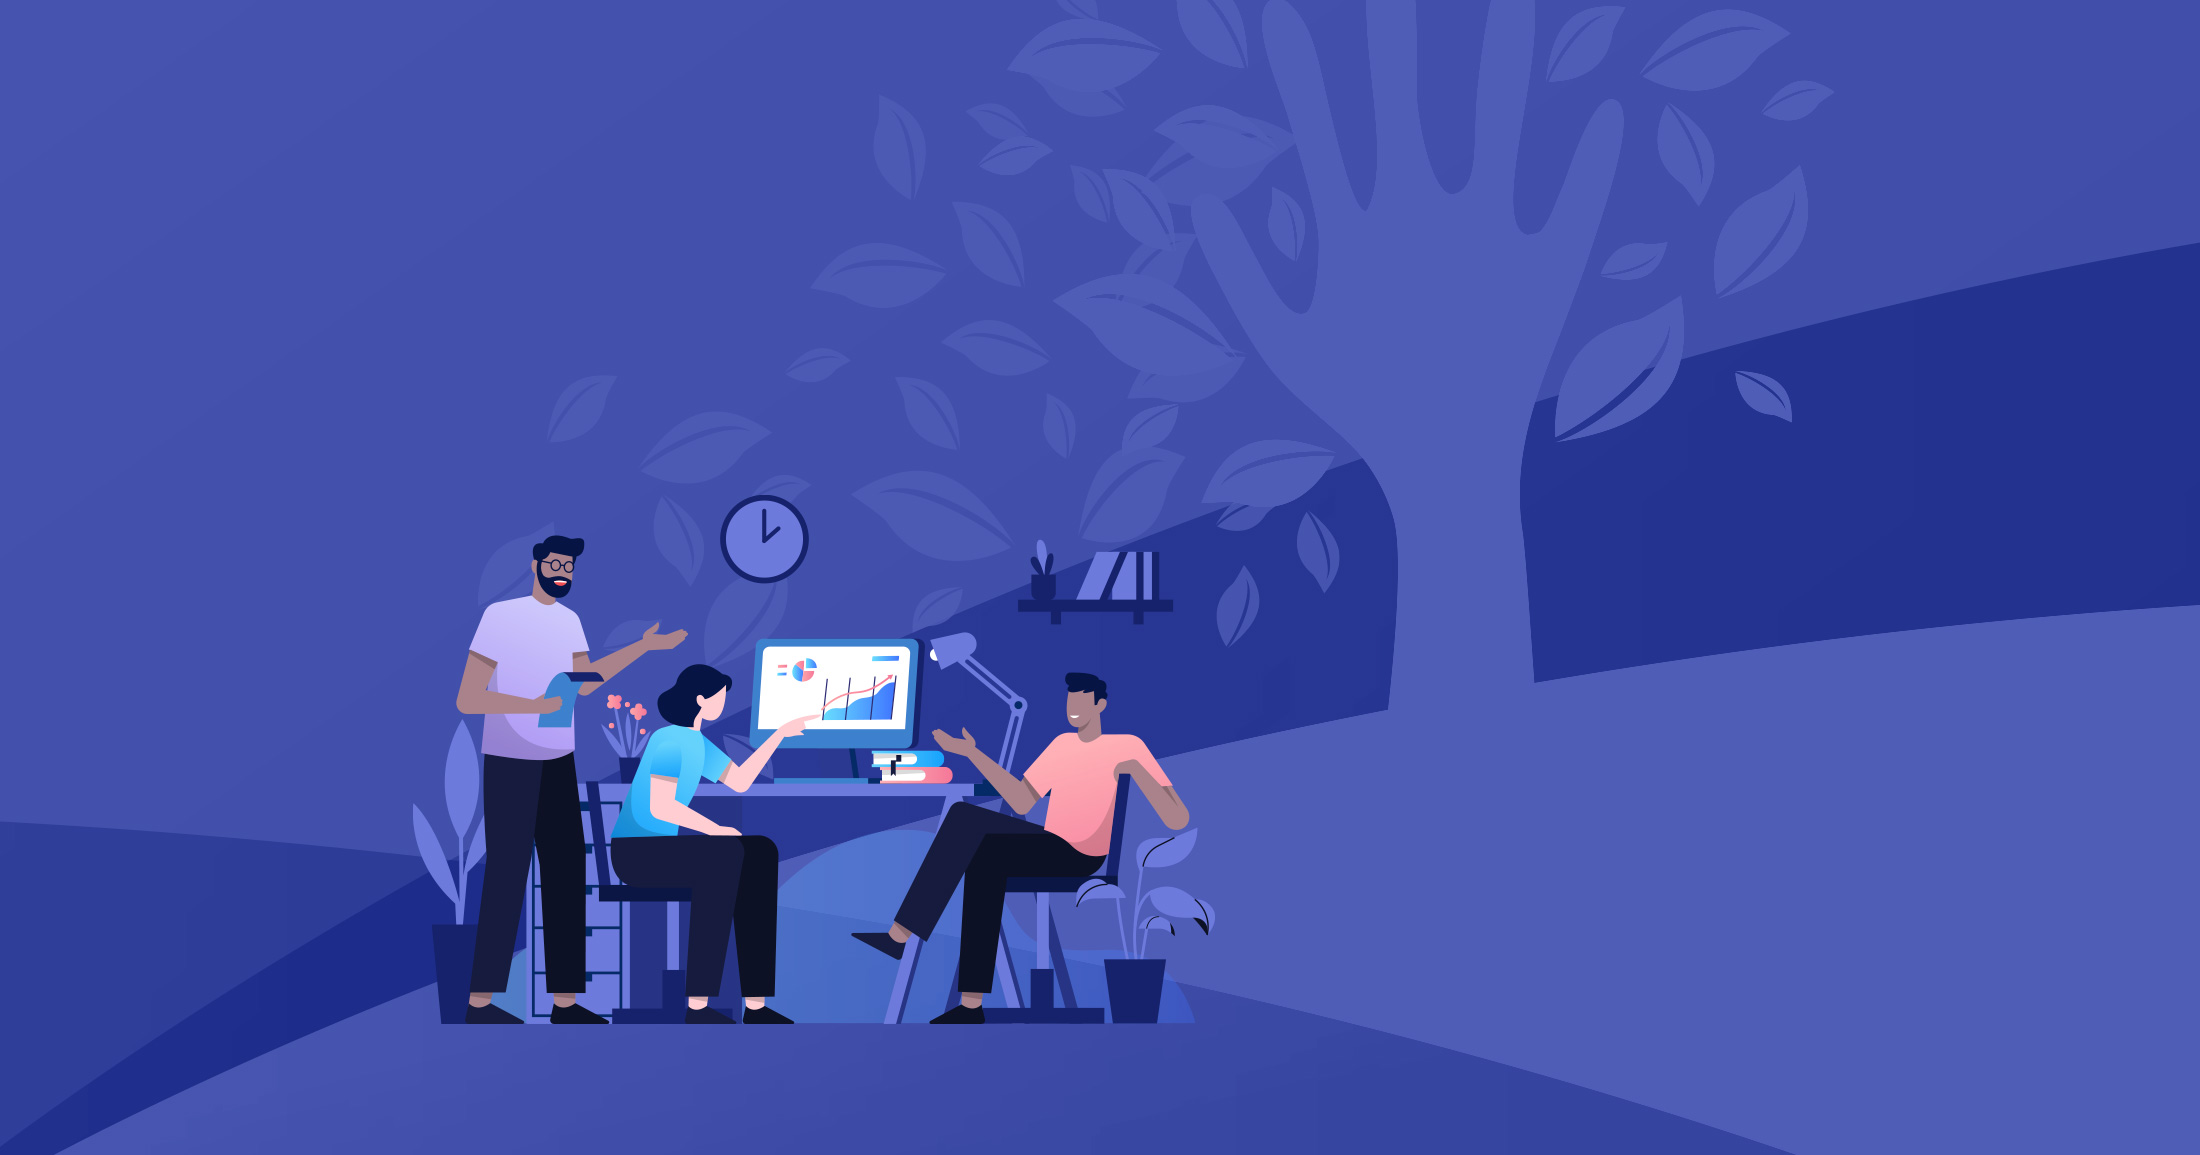 Three office workers sit around a desk talking about work and interpersonal dynamics with a large weird tree and hand float in the background.